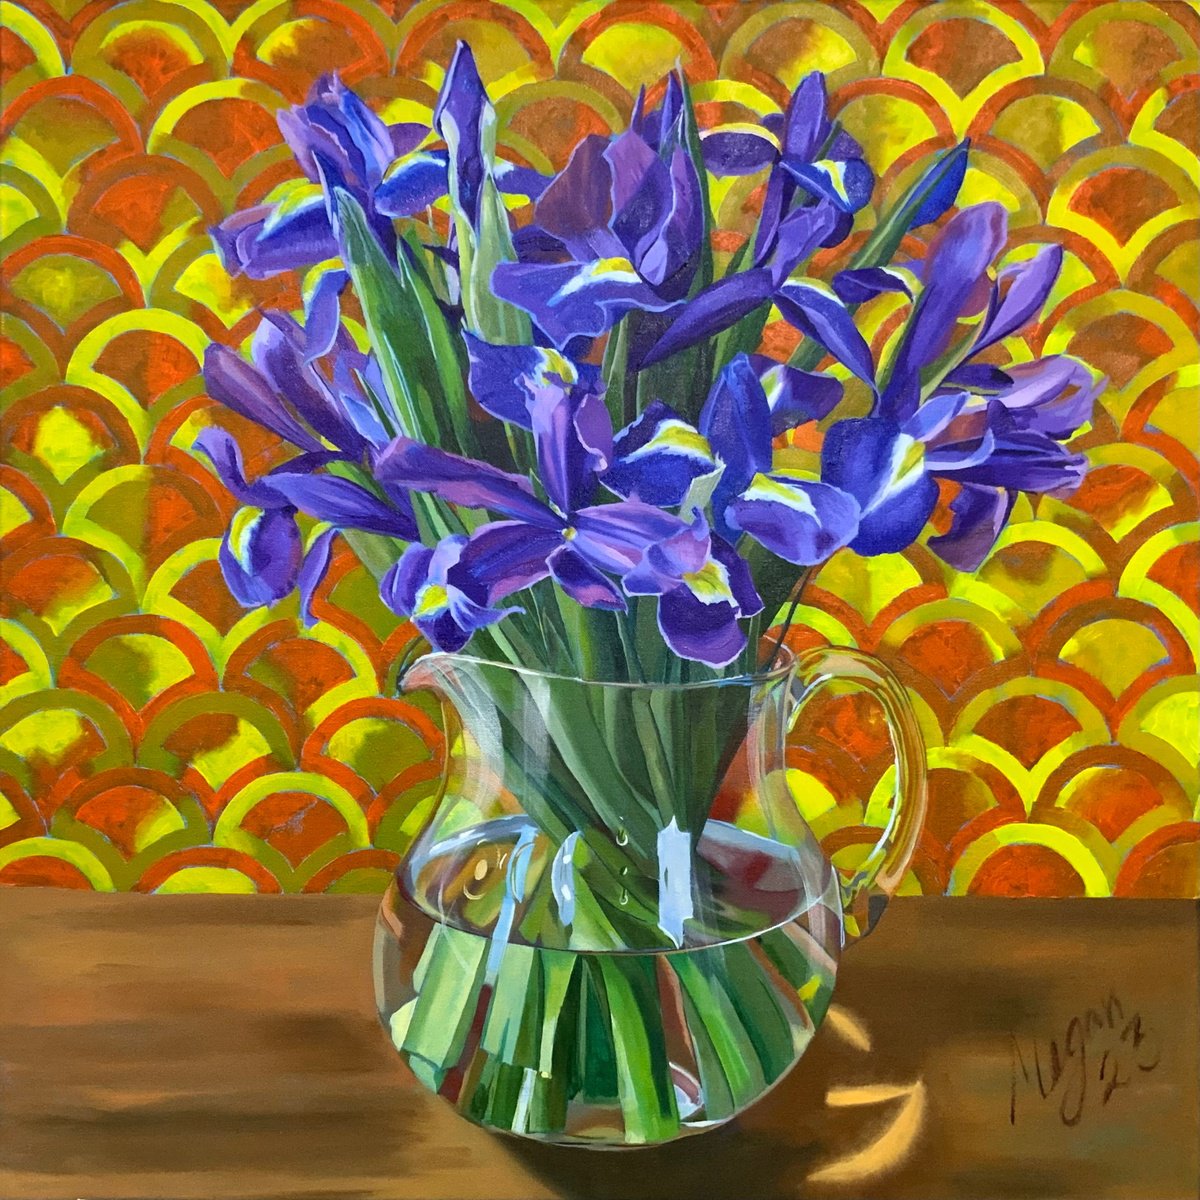 Irises with a Patterned Background by Megan Cheetham